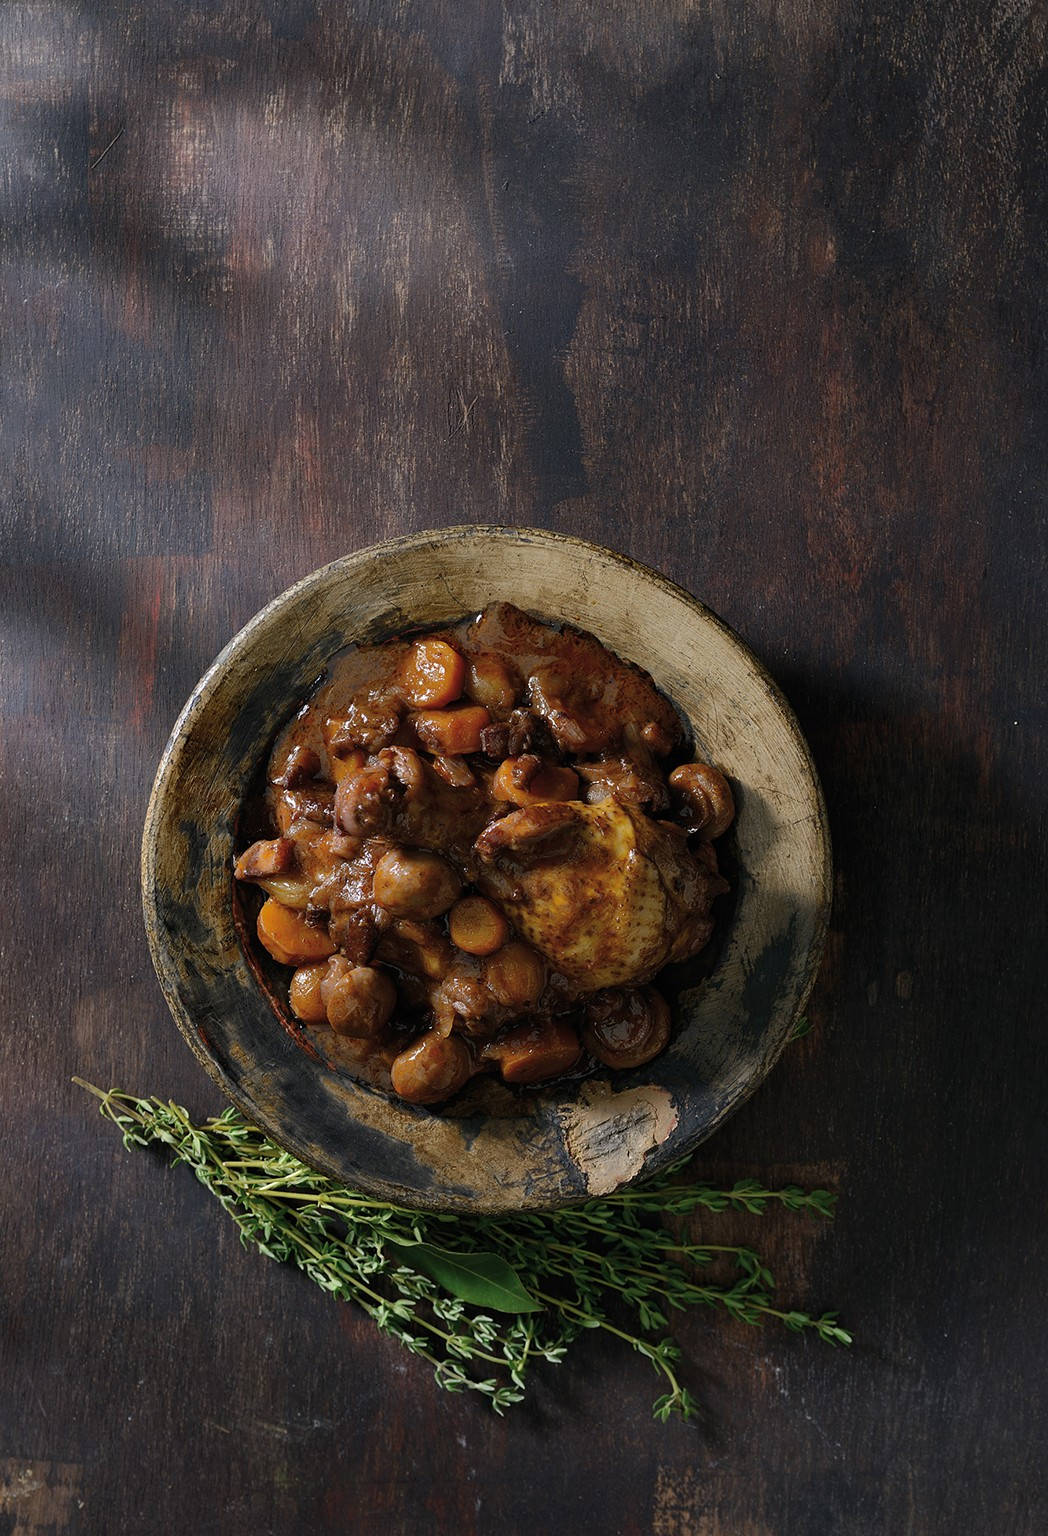 Caption: Decadent Coq Au Vin dish served beside aromatic rosemary leaves Wallpaper